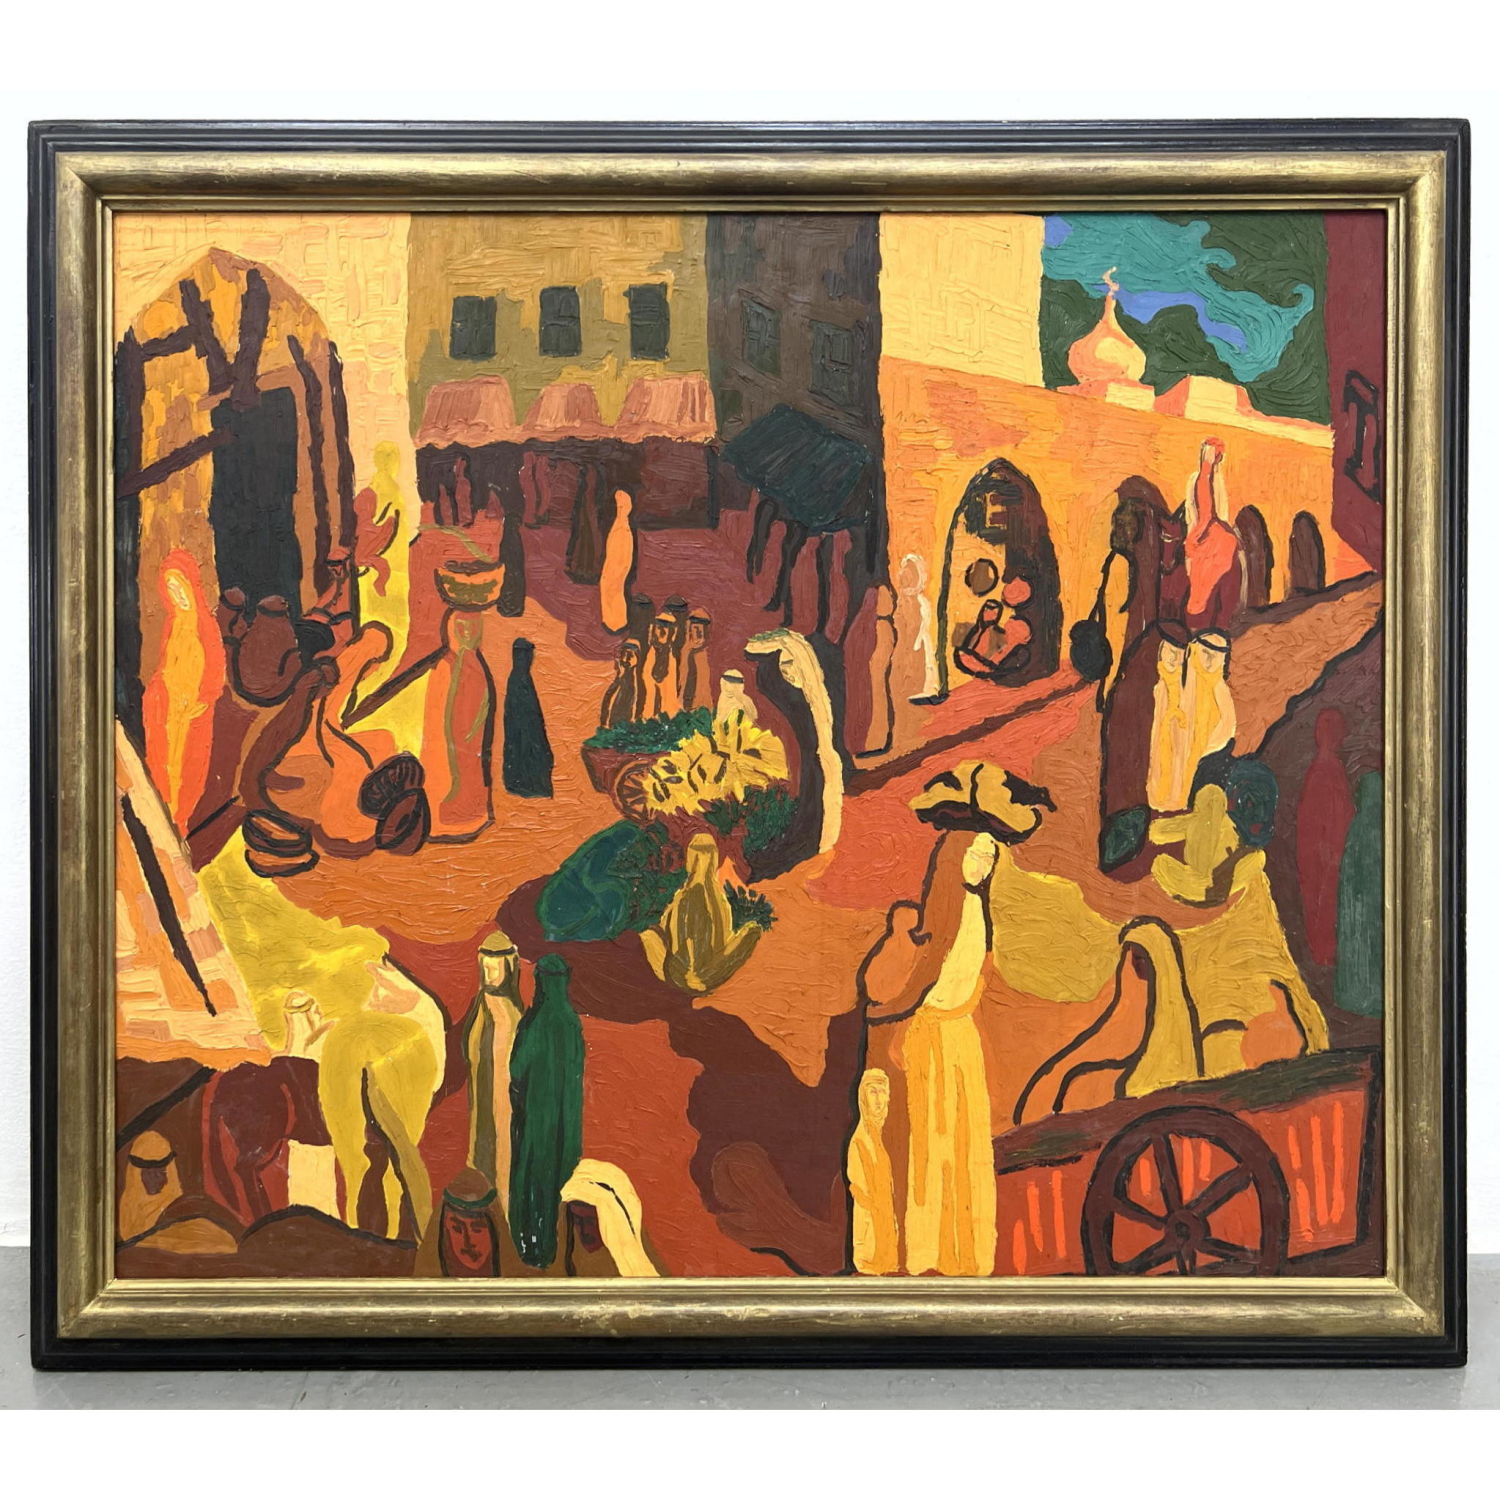 SELIM Moroccan Modernist Painting.